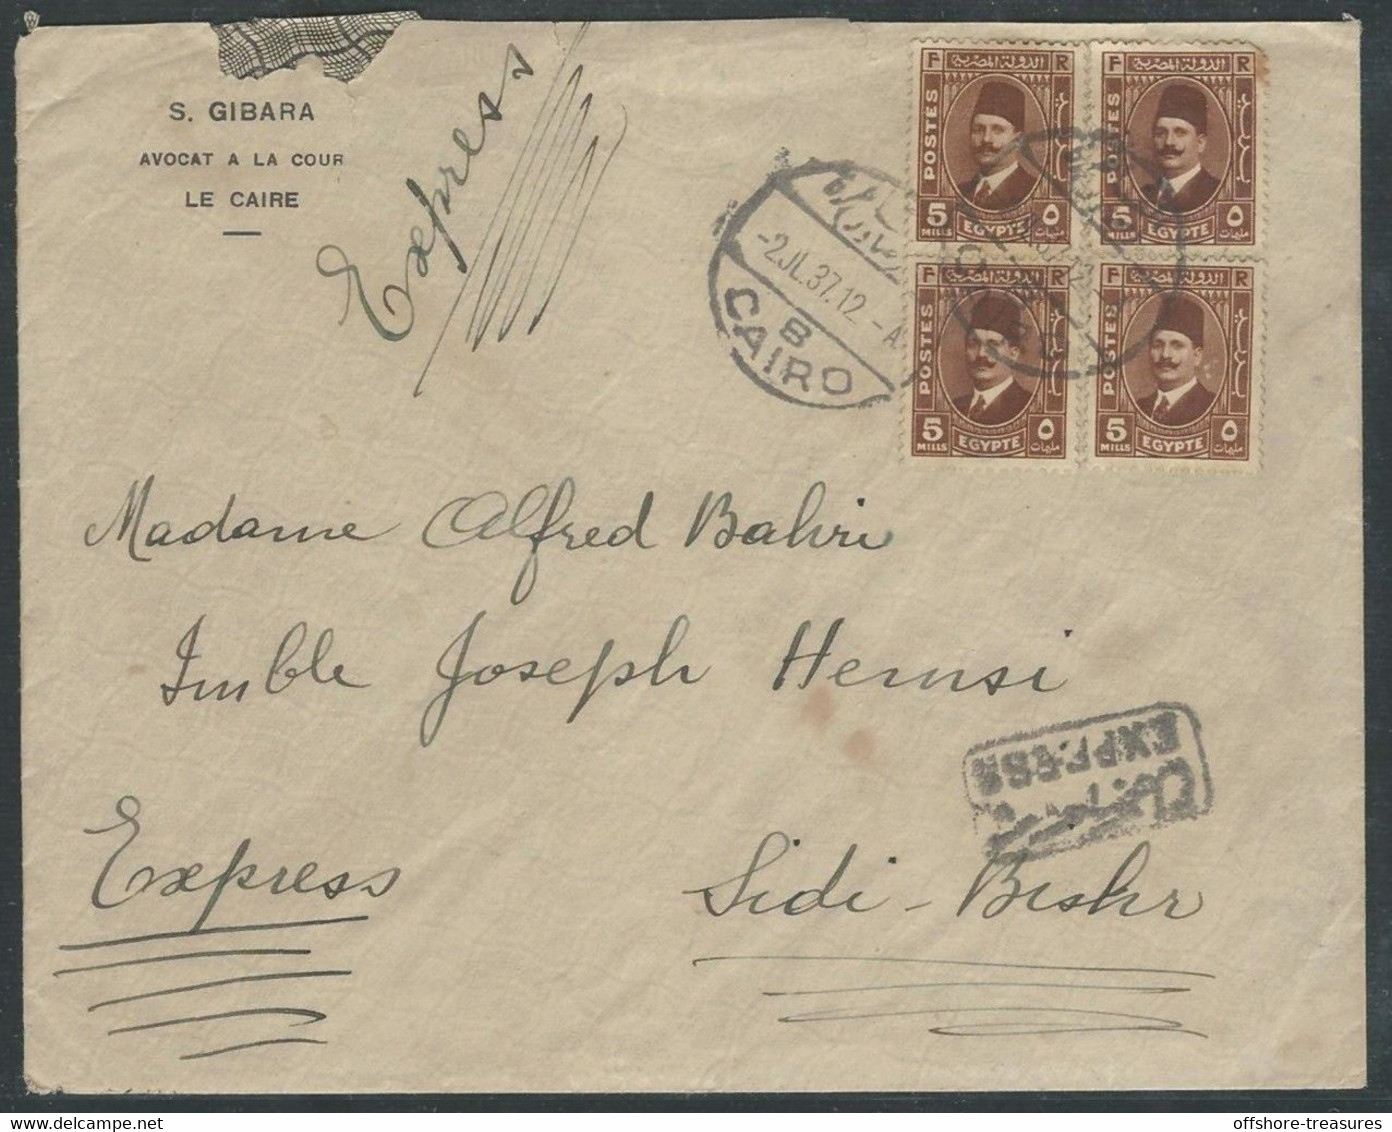 EGYPT 1937 Express Cover 20 Mills King Fuad / Fouad Stamp Usage Rare Example /Not Motorcycle - Cairo To Alexandria - 1915-1921 British Protectorate